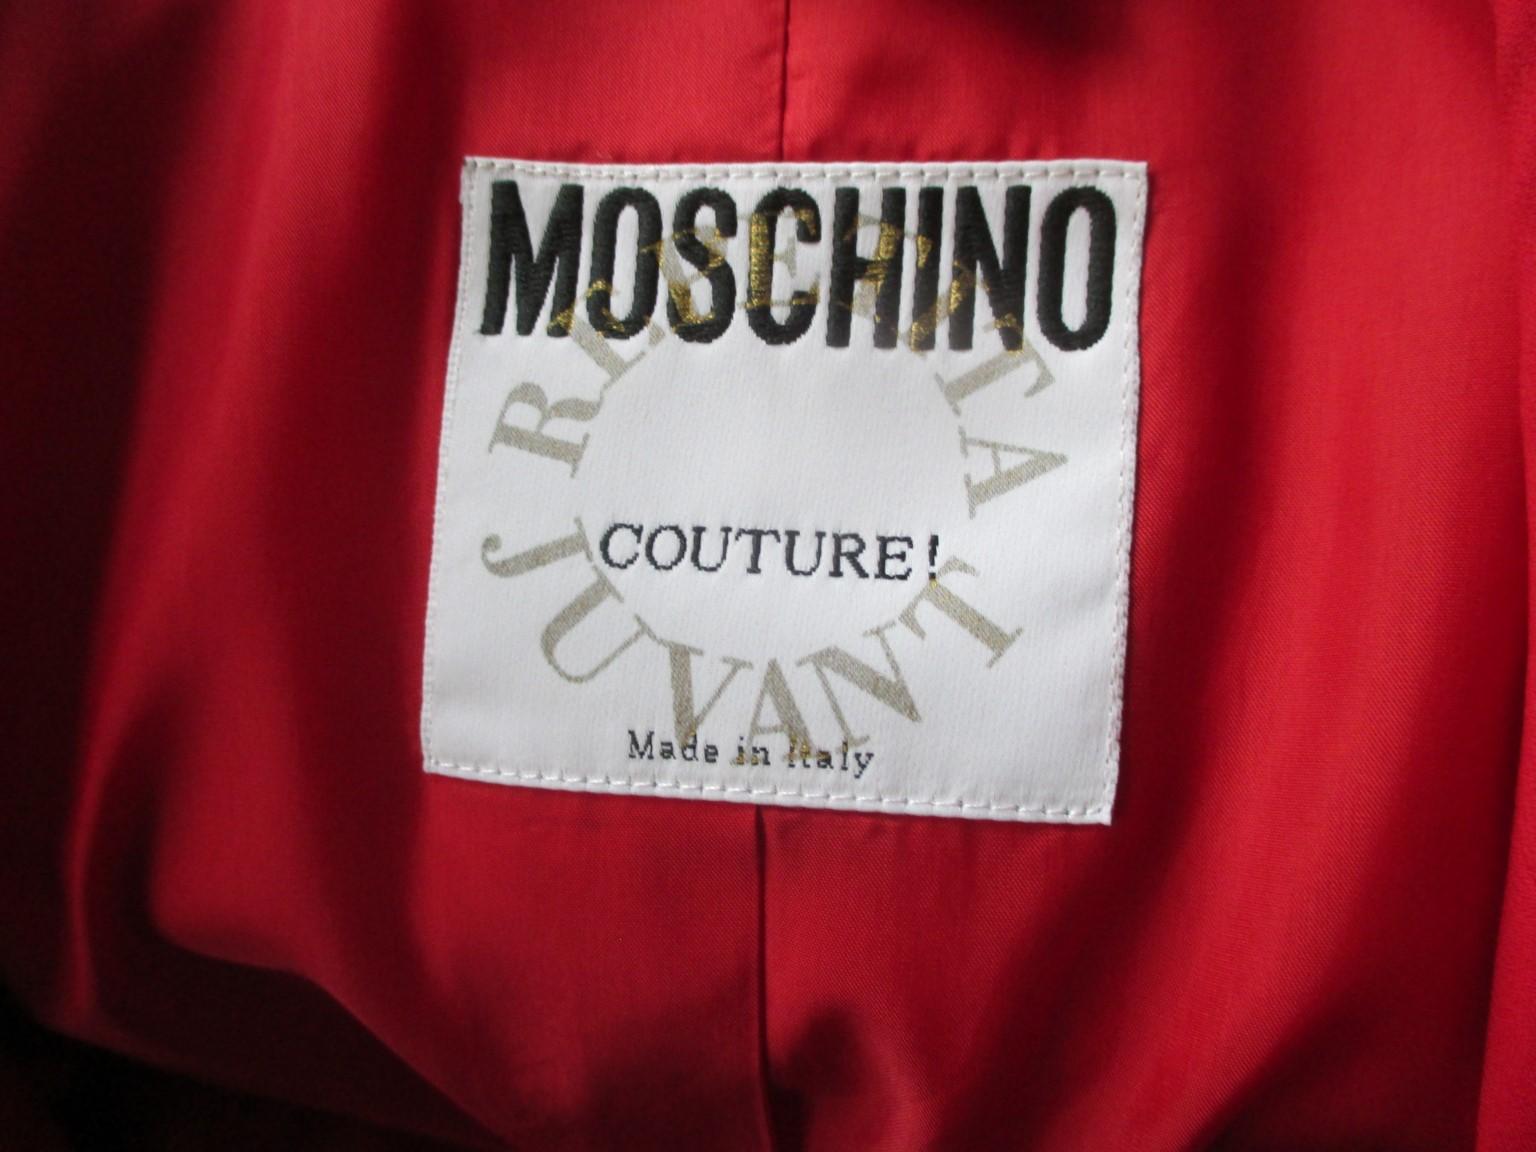 Collectors item:
This is an amazing rare 1990's Moschino Couture! Repetita Juvant
blazer jacket.
Color: Red
With 2 buttons, 2 pockets and 3/4 wide ruffle sleeves.

Appears to be  US 12/EU 42/ UK 14, please refer to the measurements in the